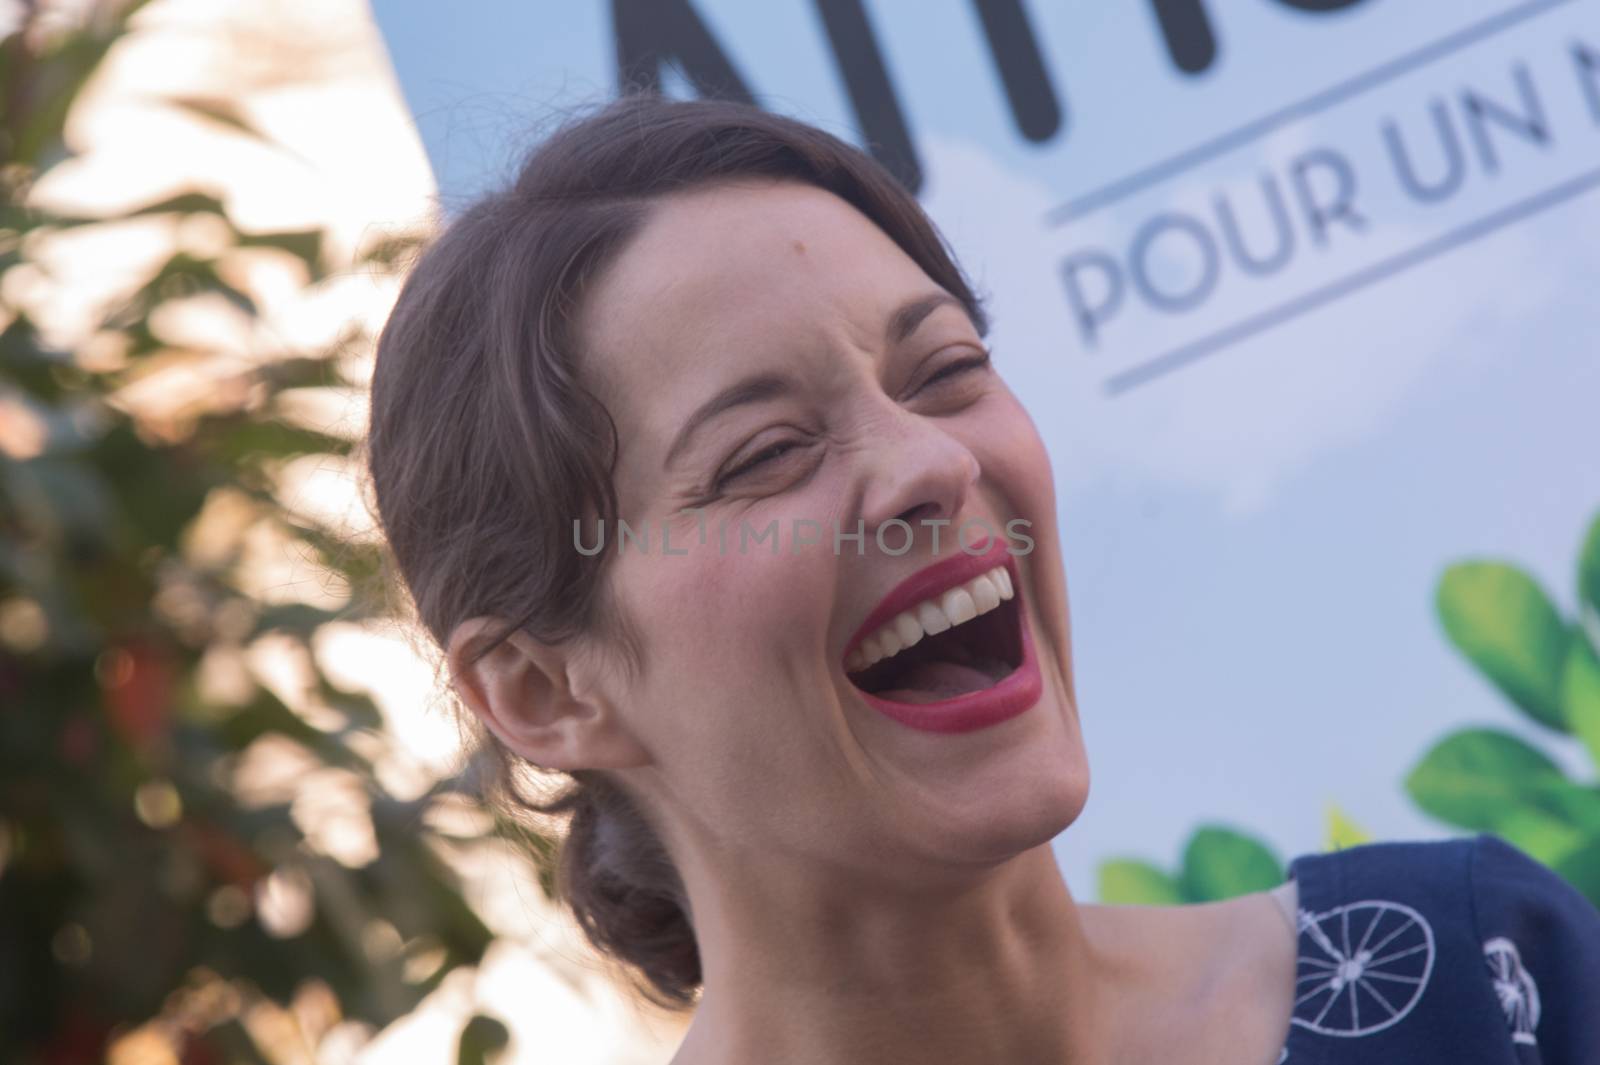 FRANCE, Courbevoie: French actress Marion Cotillard attends Atmosphere Festival in Courbevoie, near Paris, on September 19, 2015.